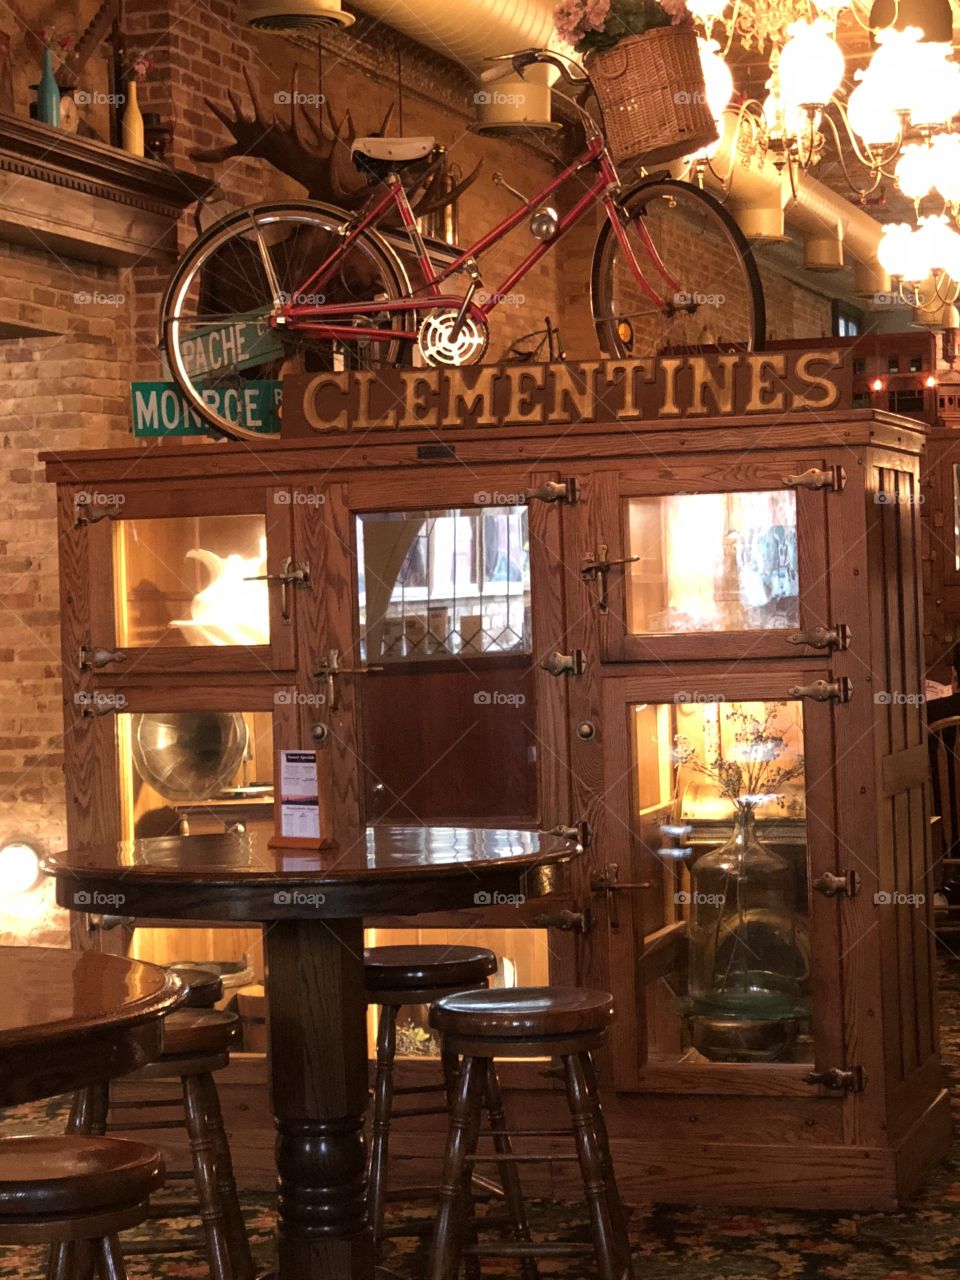 Clementines Restaurant in South Haven Michigan, USA